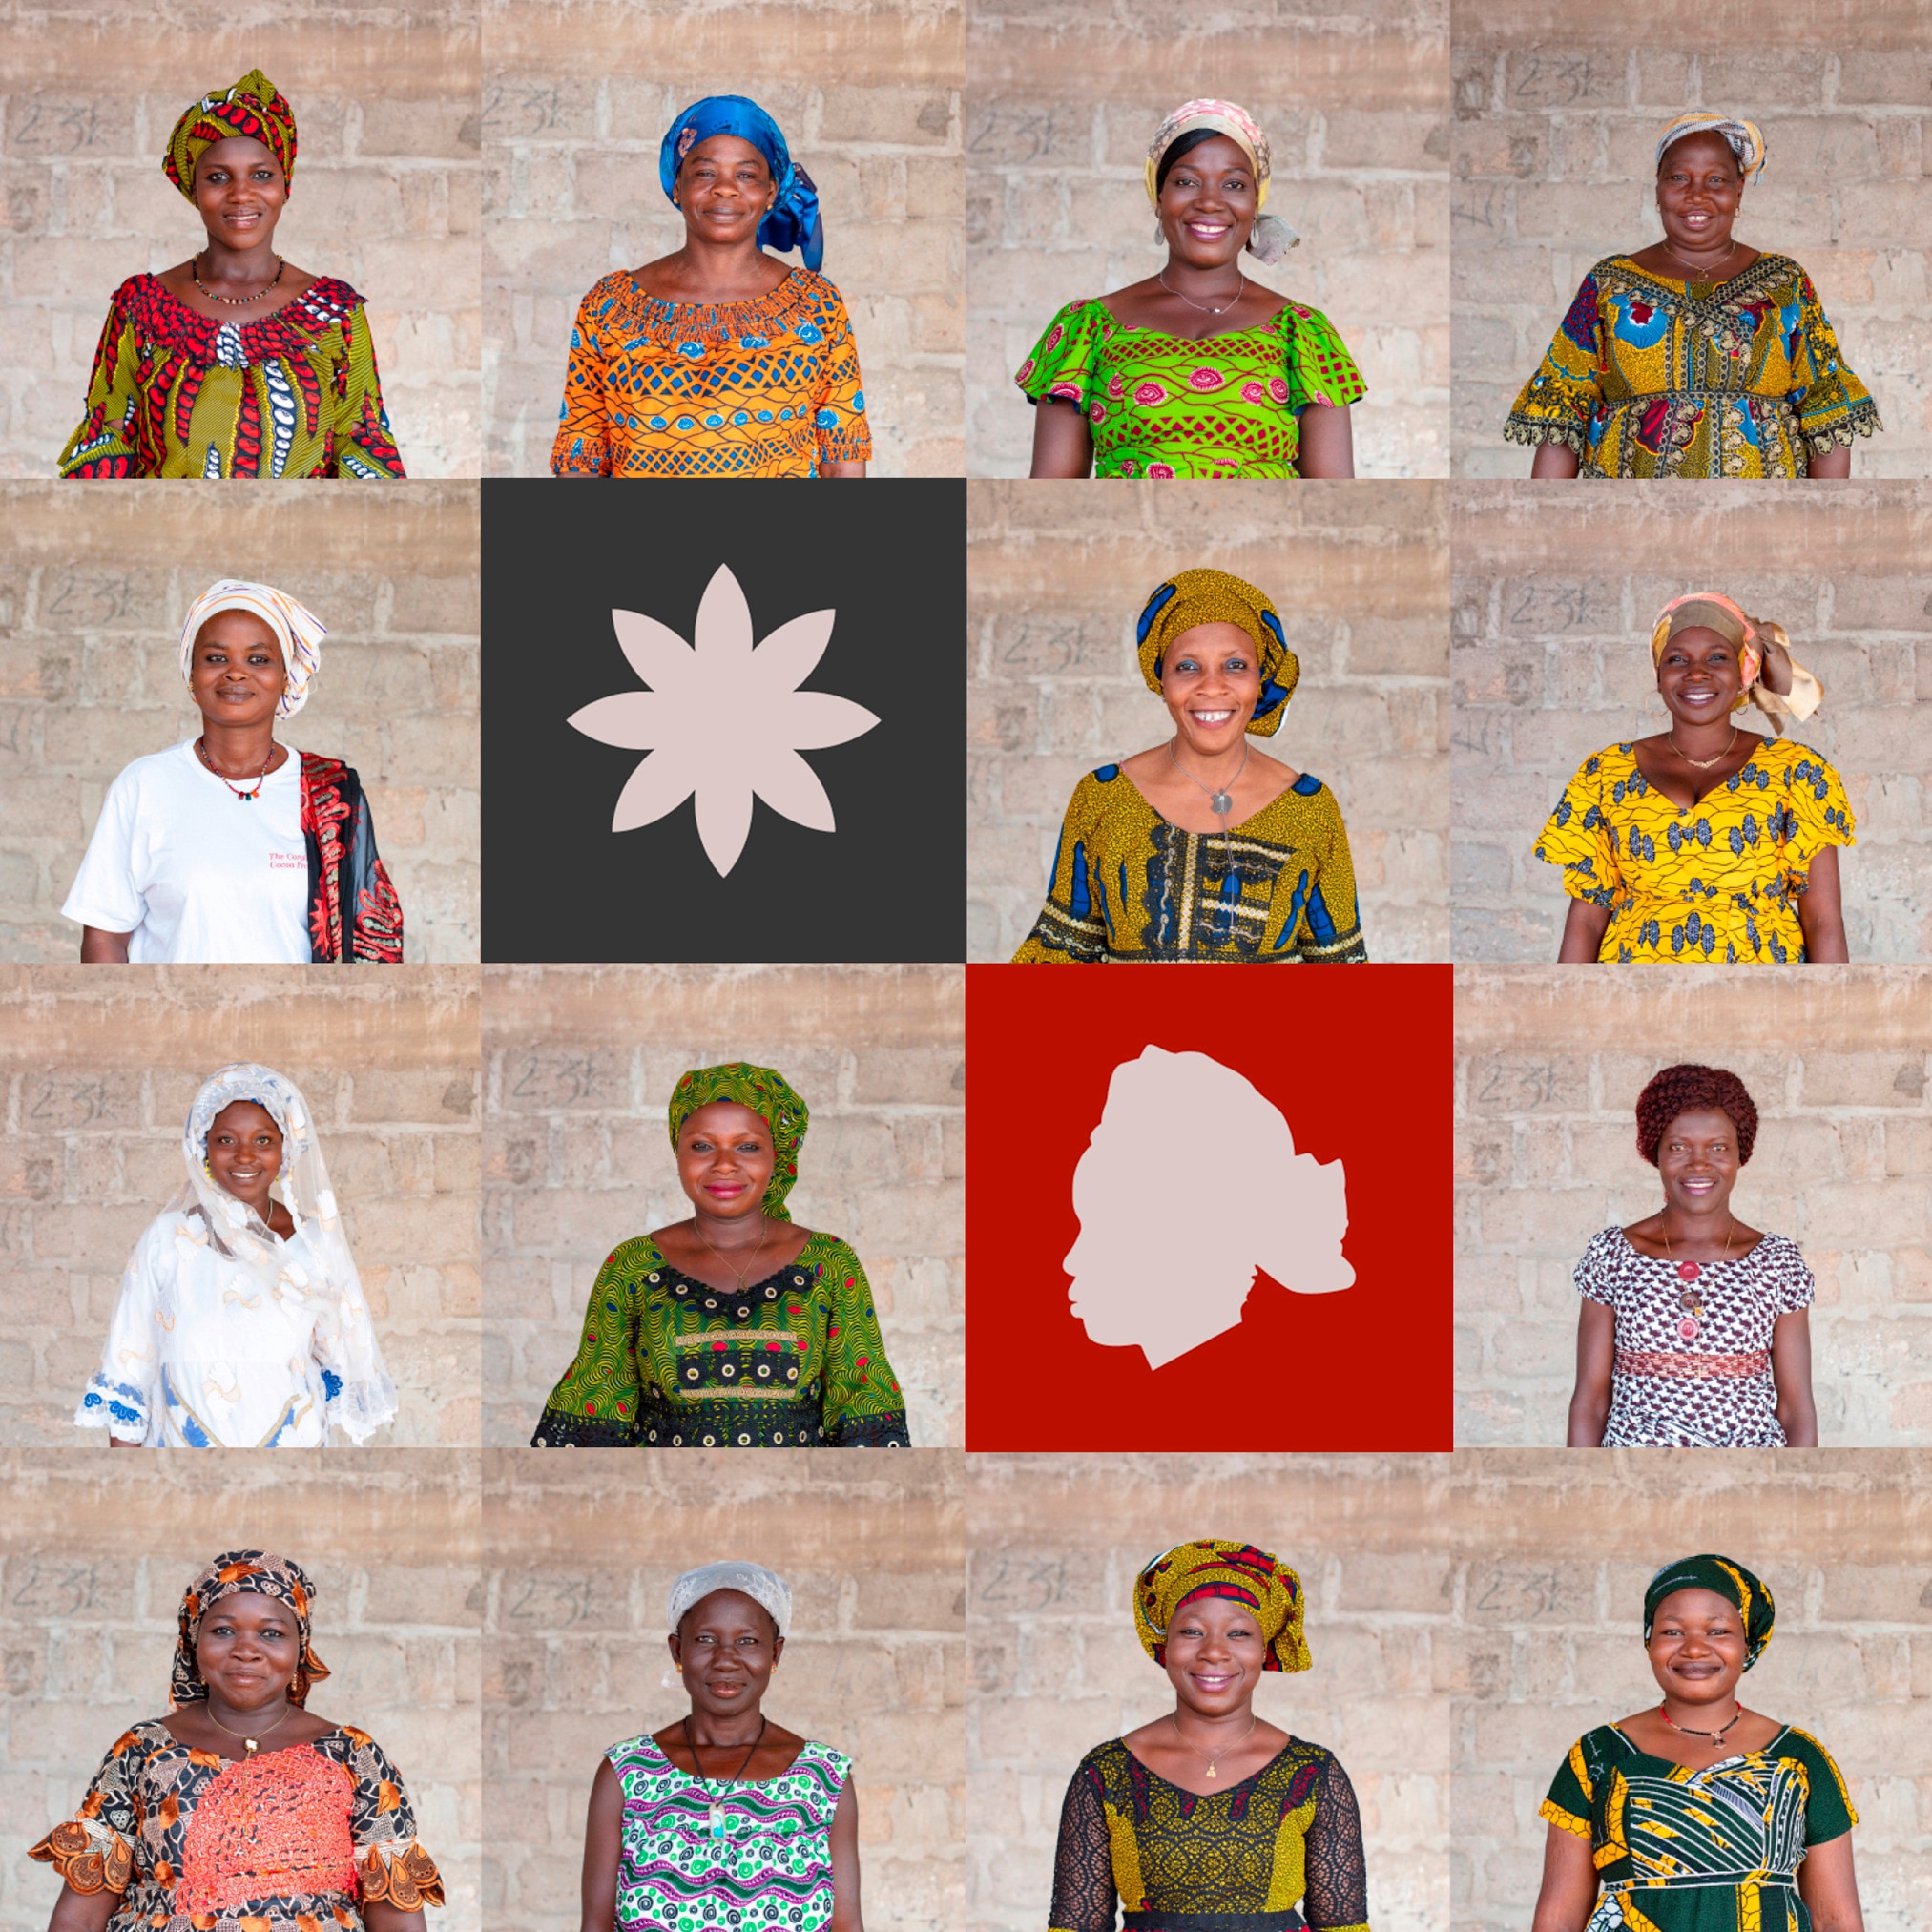 grid of 13 smiling african women portraits #8 - interspersed with a few colourful graphic square cut out illustrations